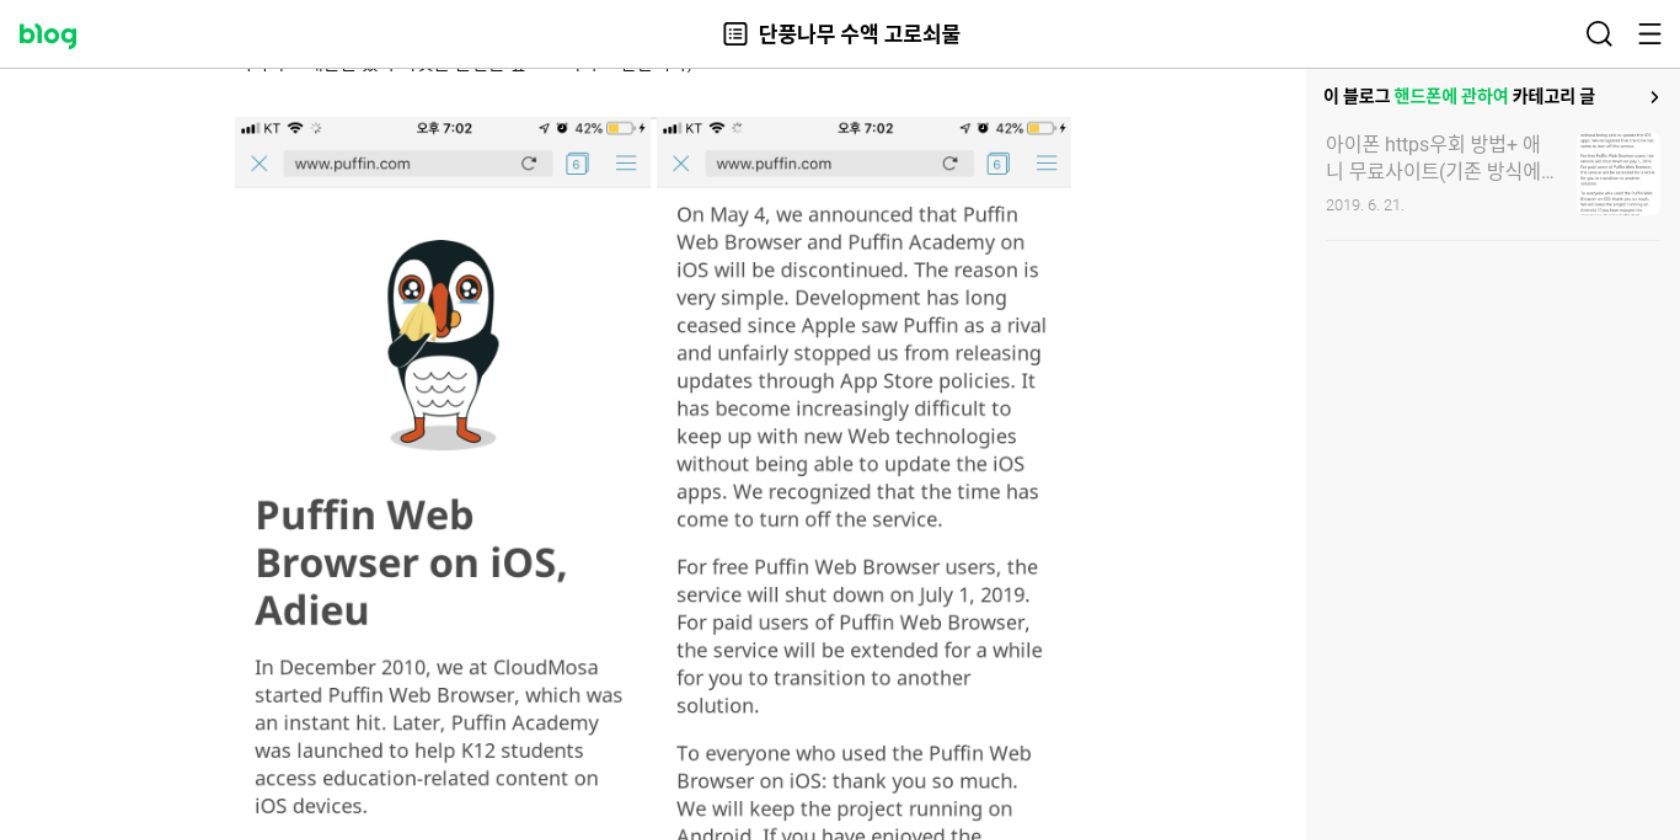 An article on Naver about the Puffin iOS app being discontinued